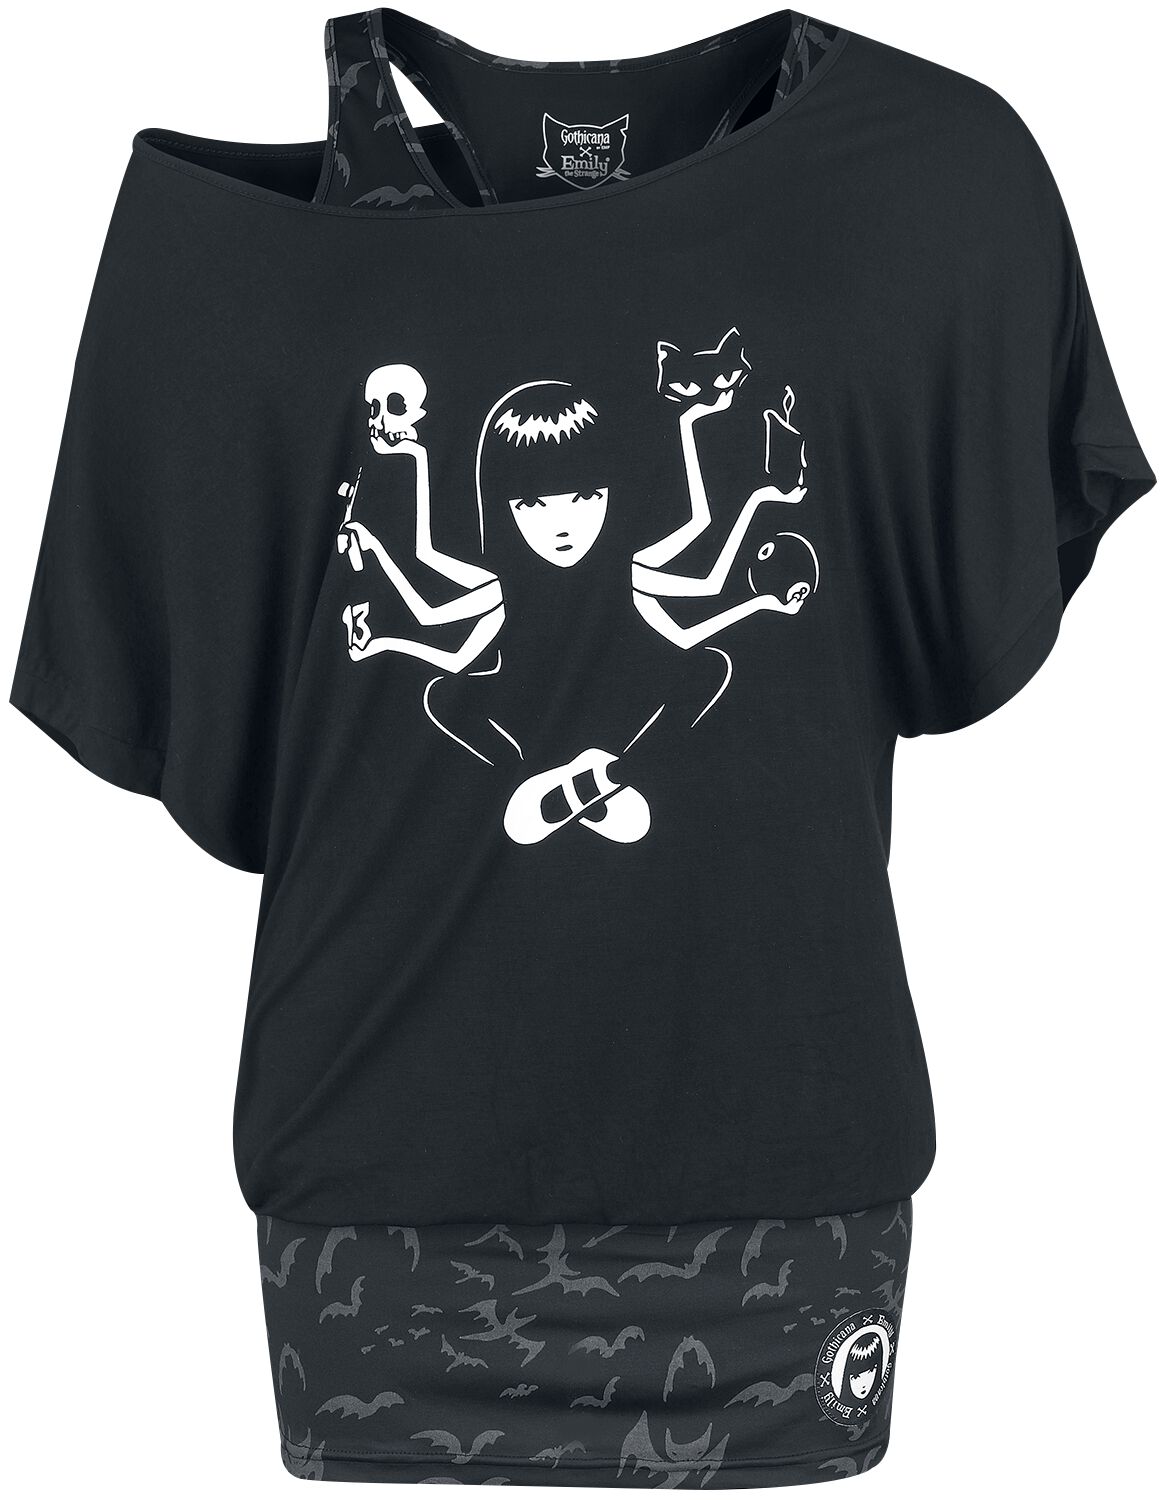 Image of T-Shirt Gothic di Gothicana by EMP - Gothicana X Emily the Strange 2-in-1 t-shirt and top - S - Donna - nero